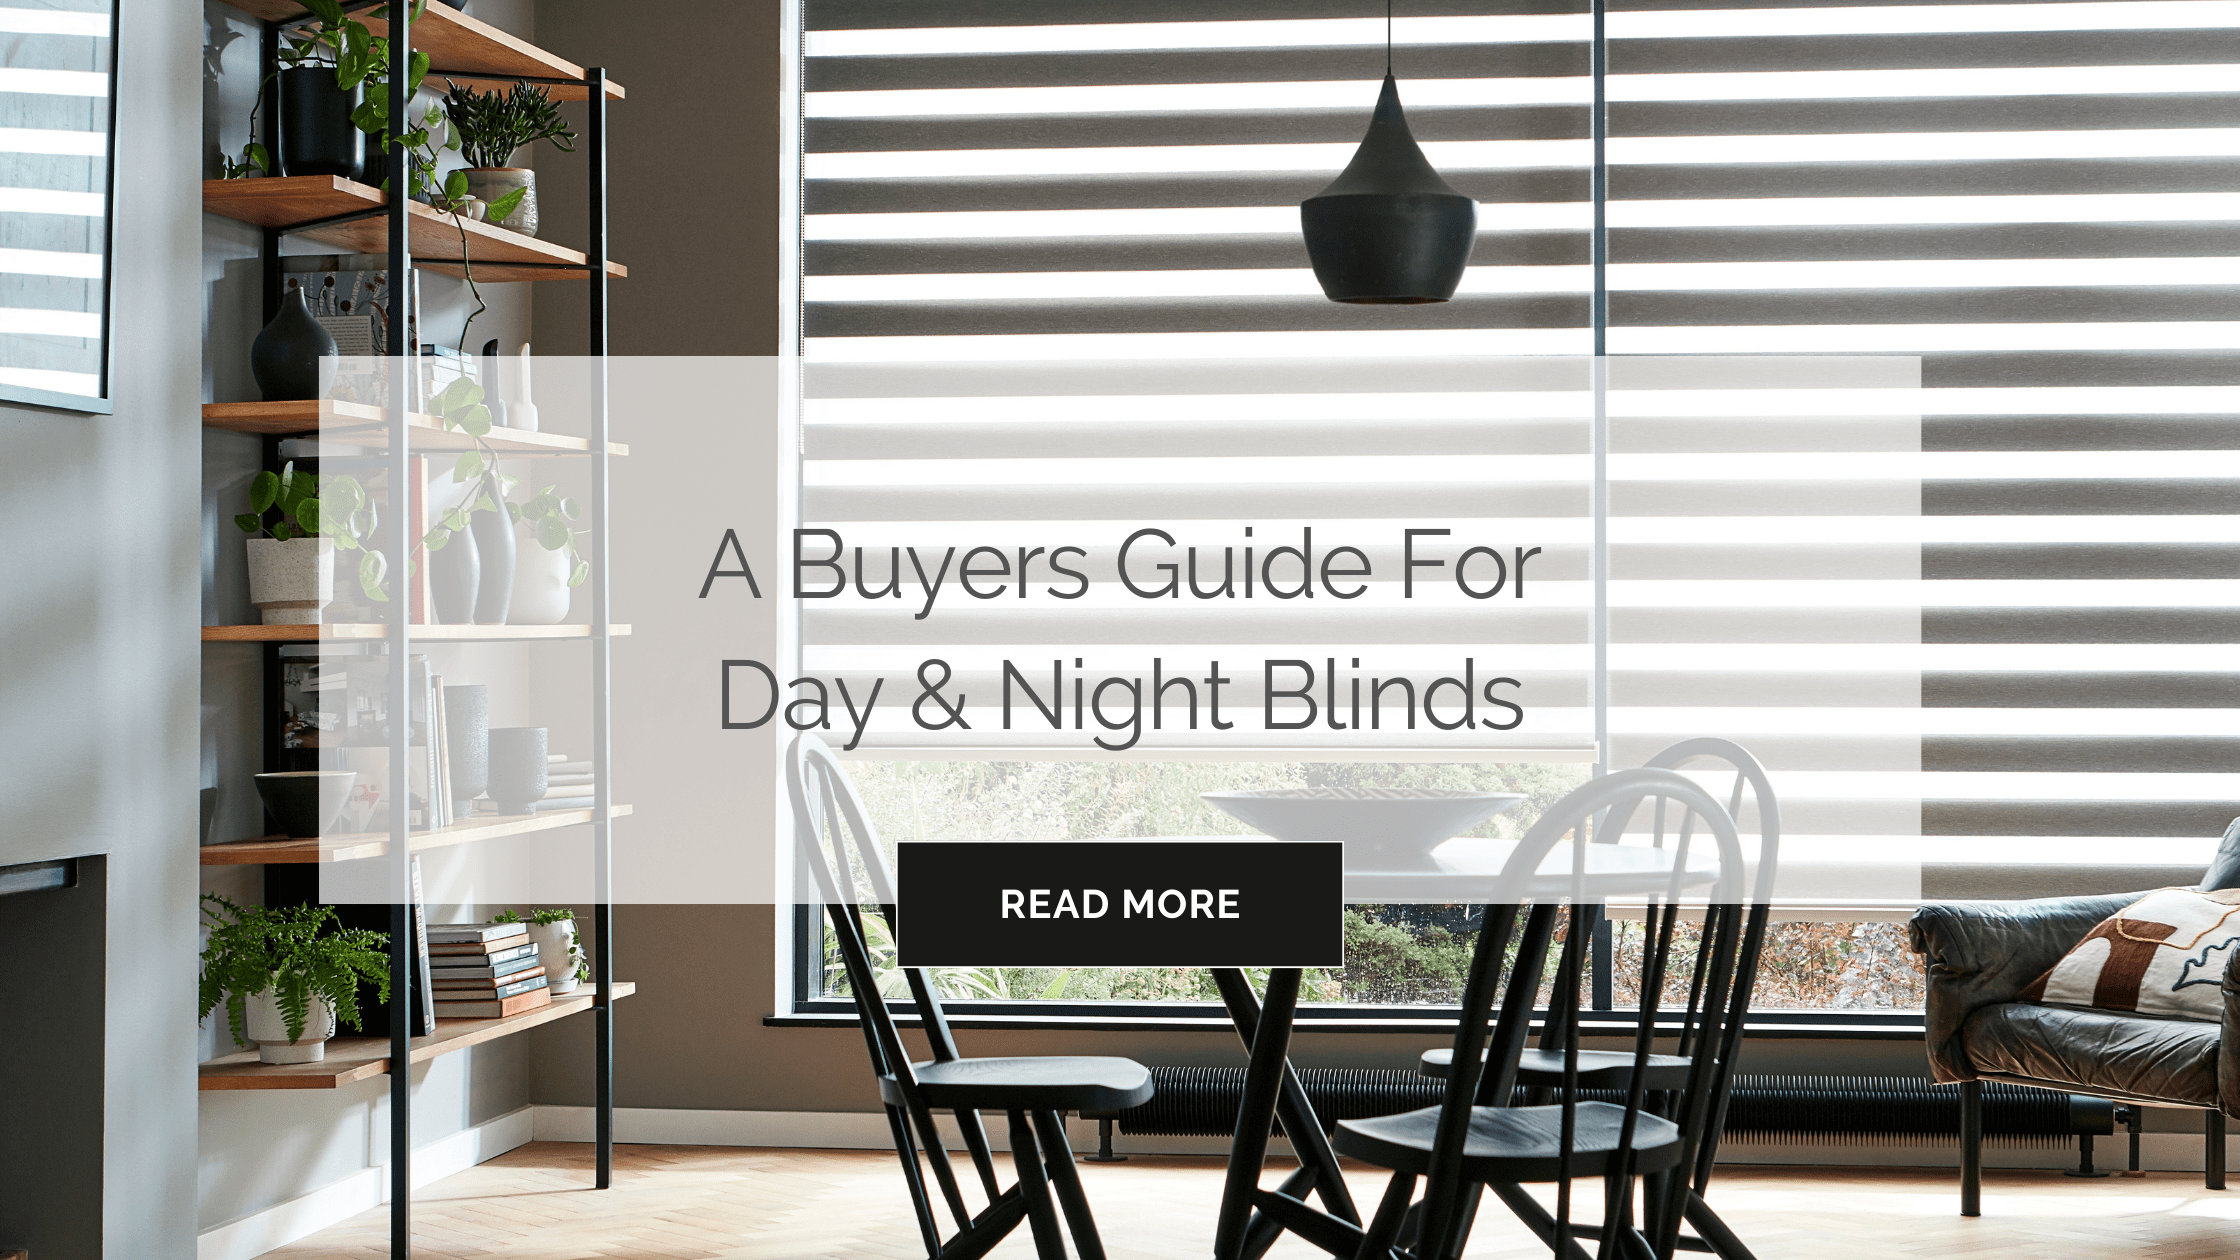 A buyers guide for day and night blinds